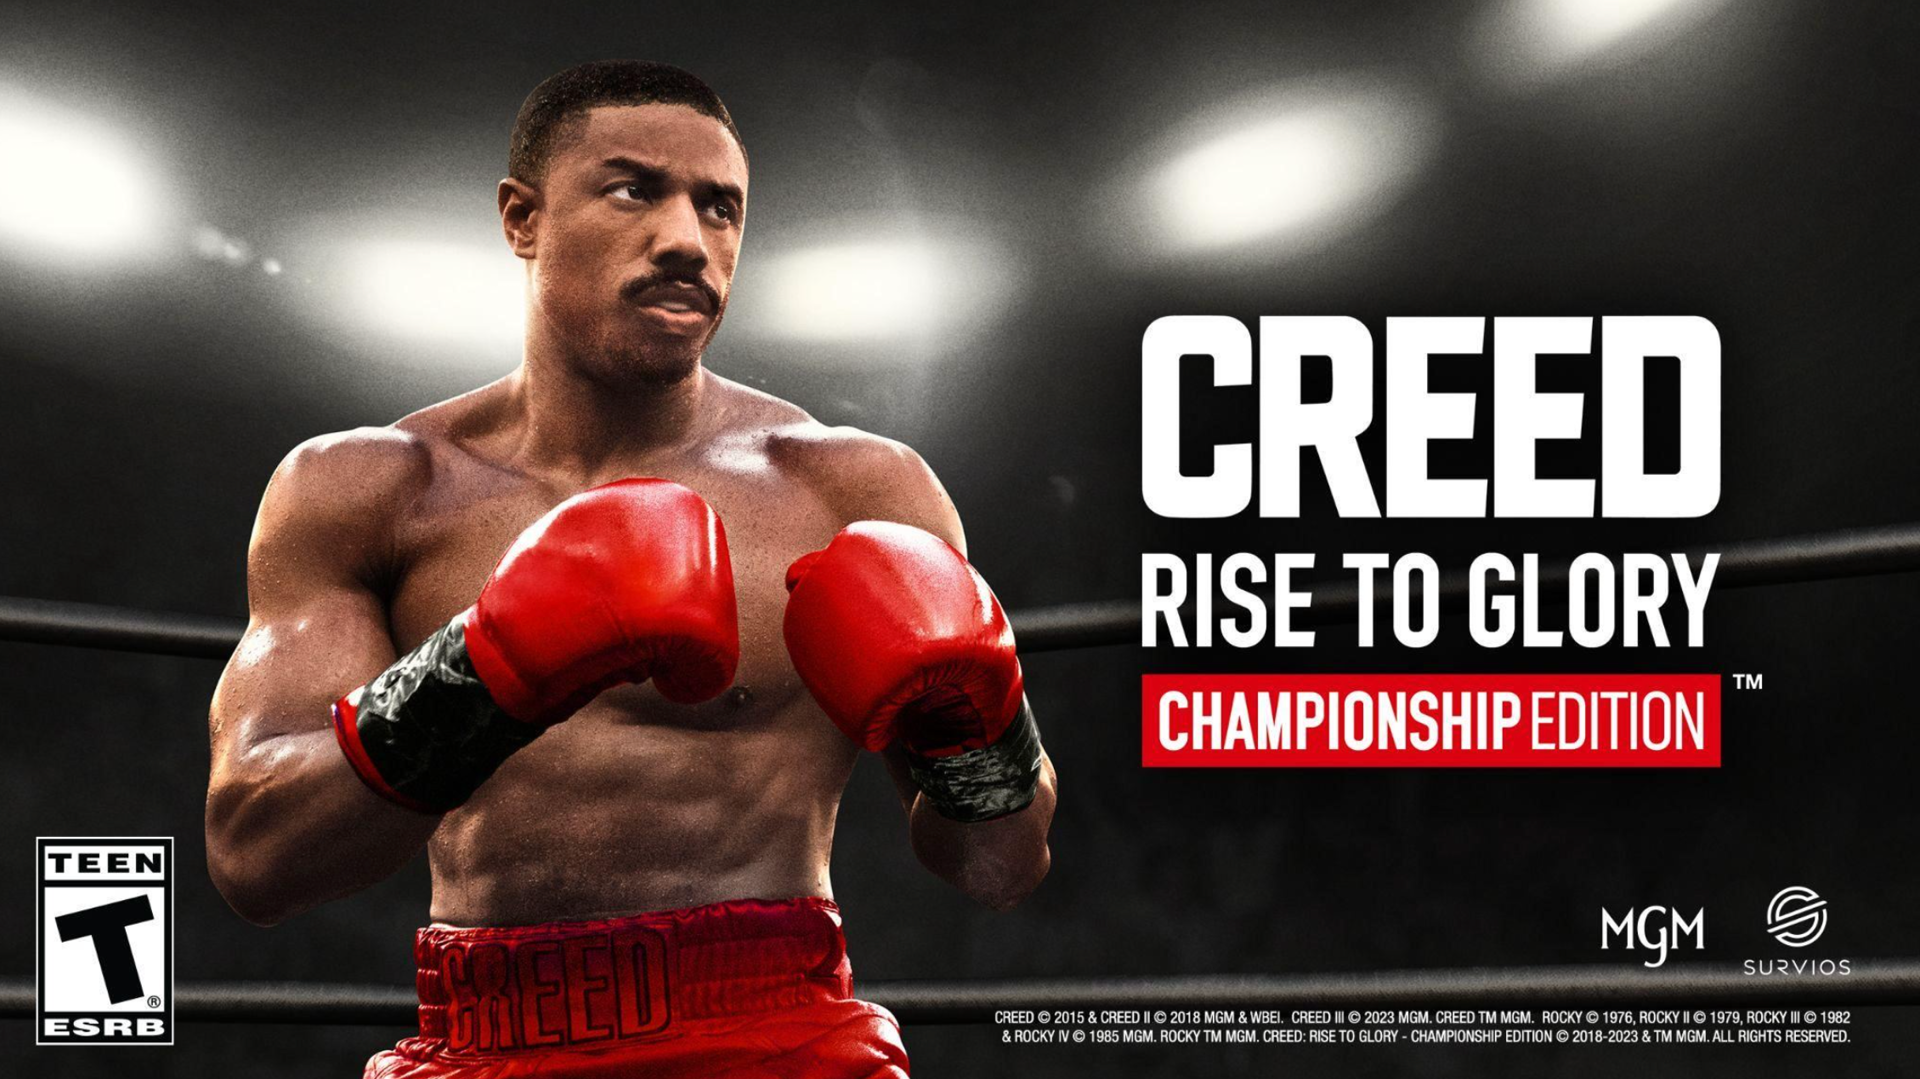 Creed Rise to Glory Championship Edition Comes to PlayStation